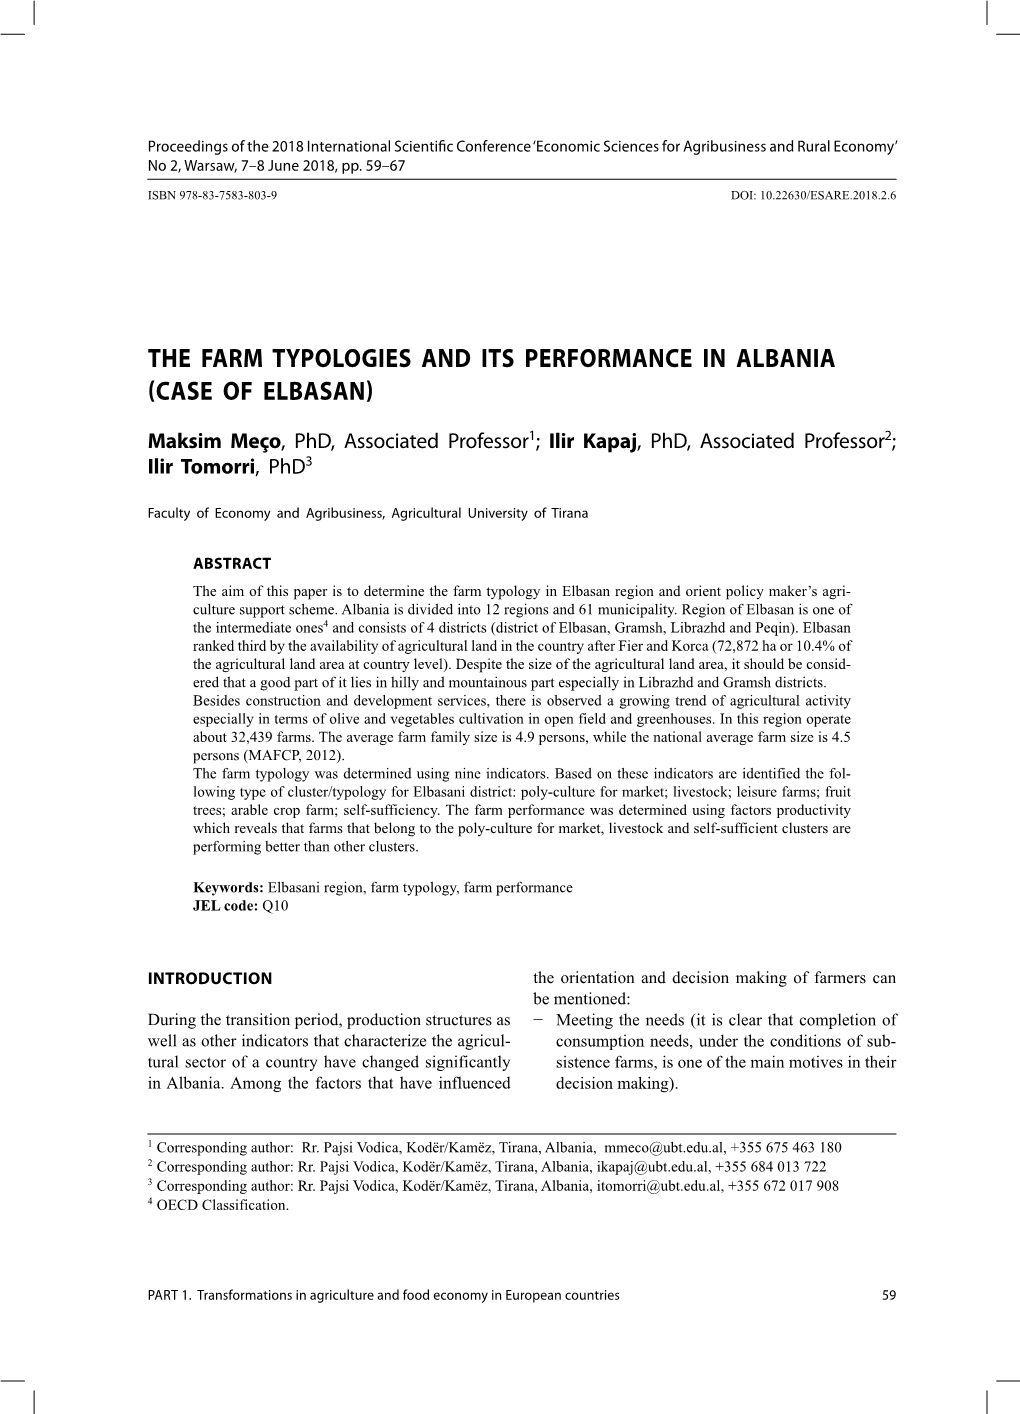 The Farm Typologies and Its Performance in Albania (Case of Elbasan)